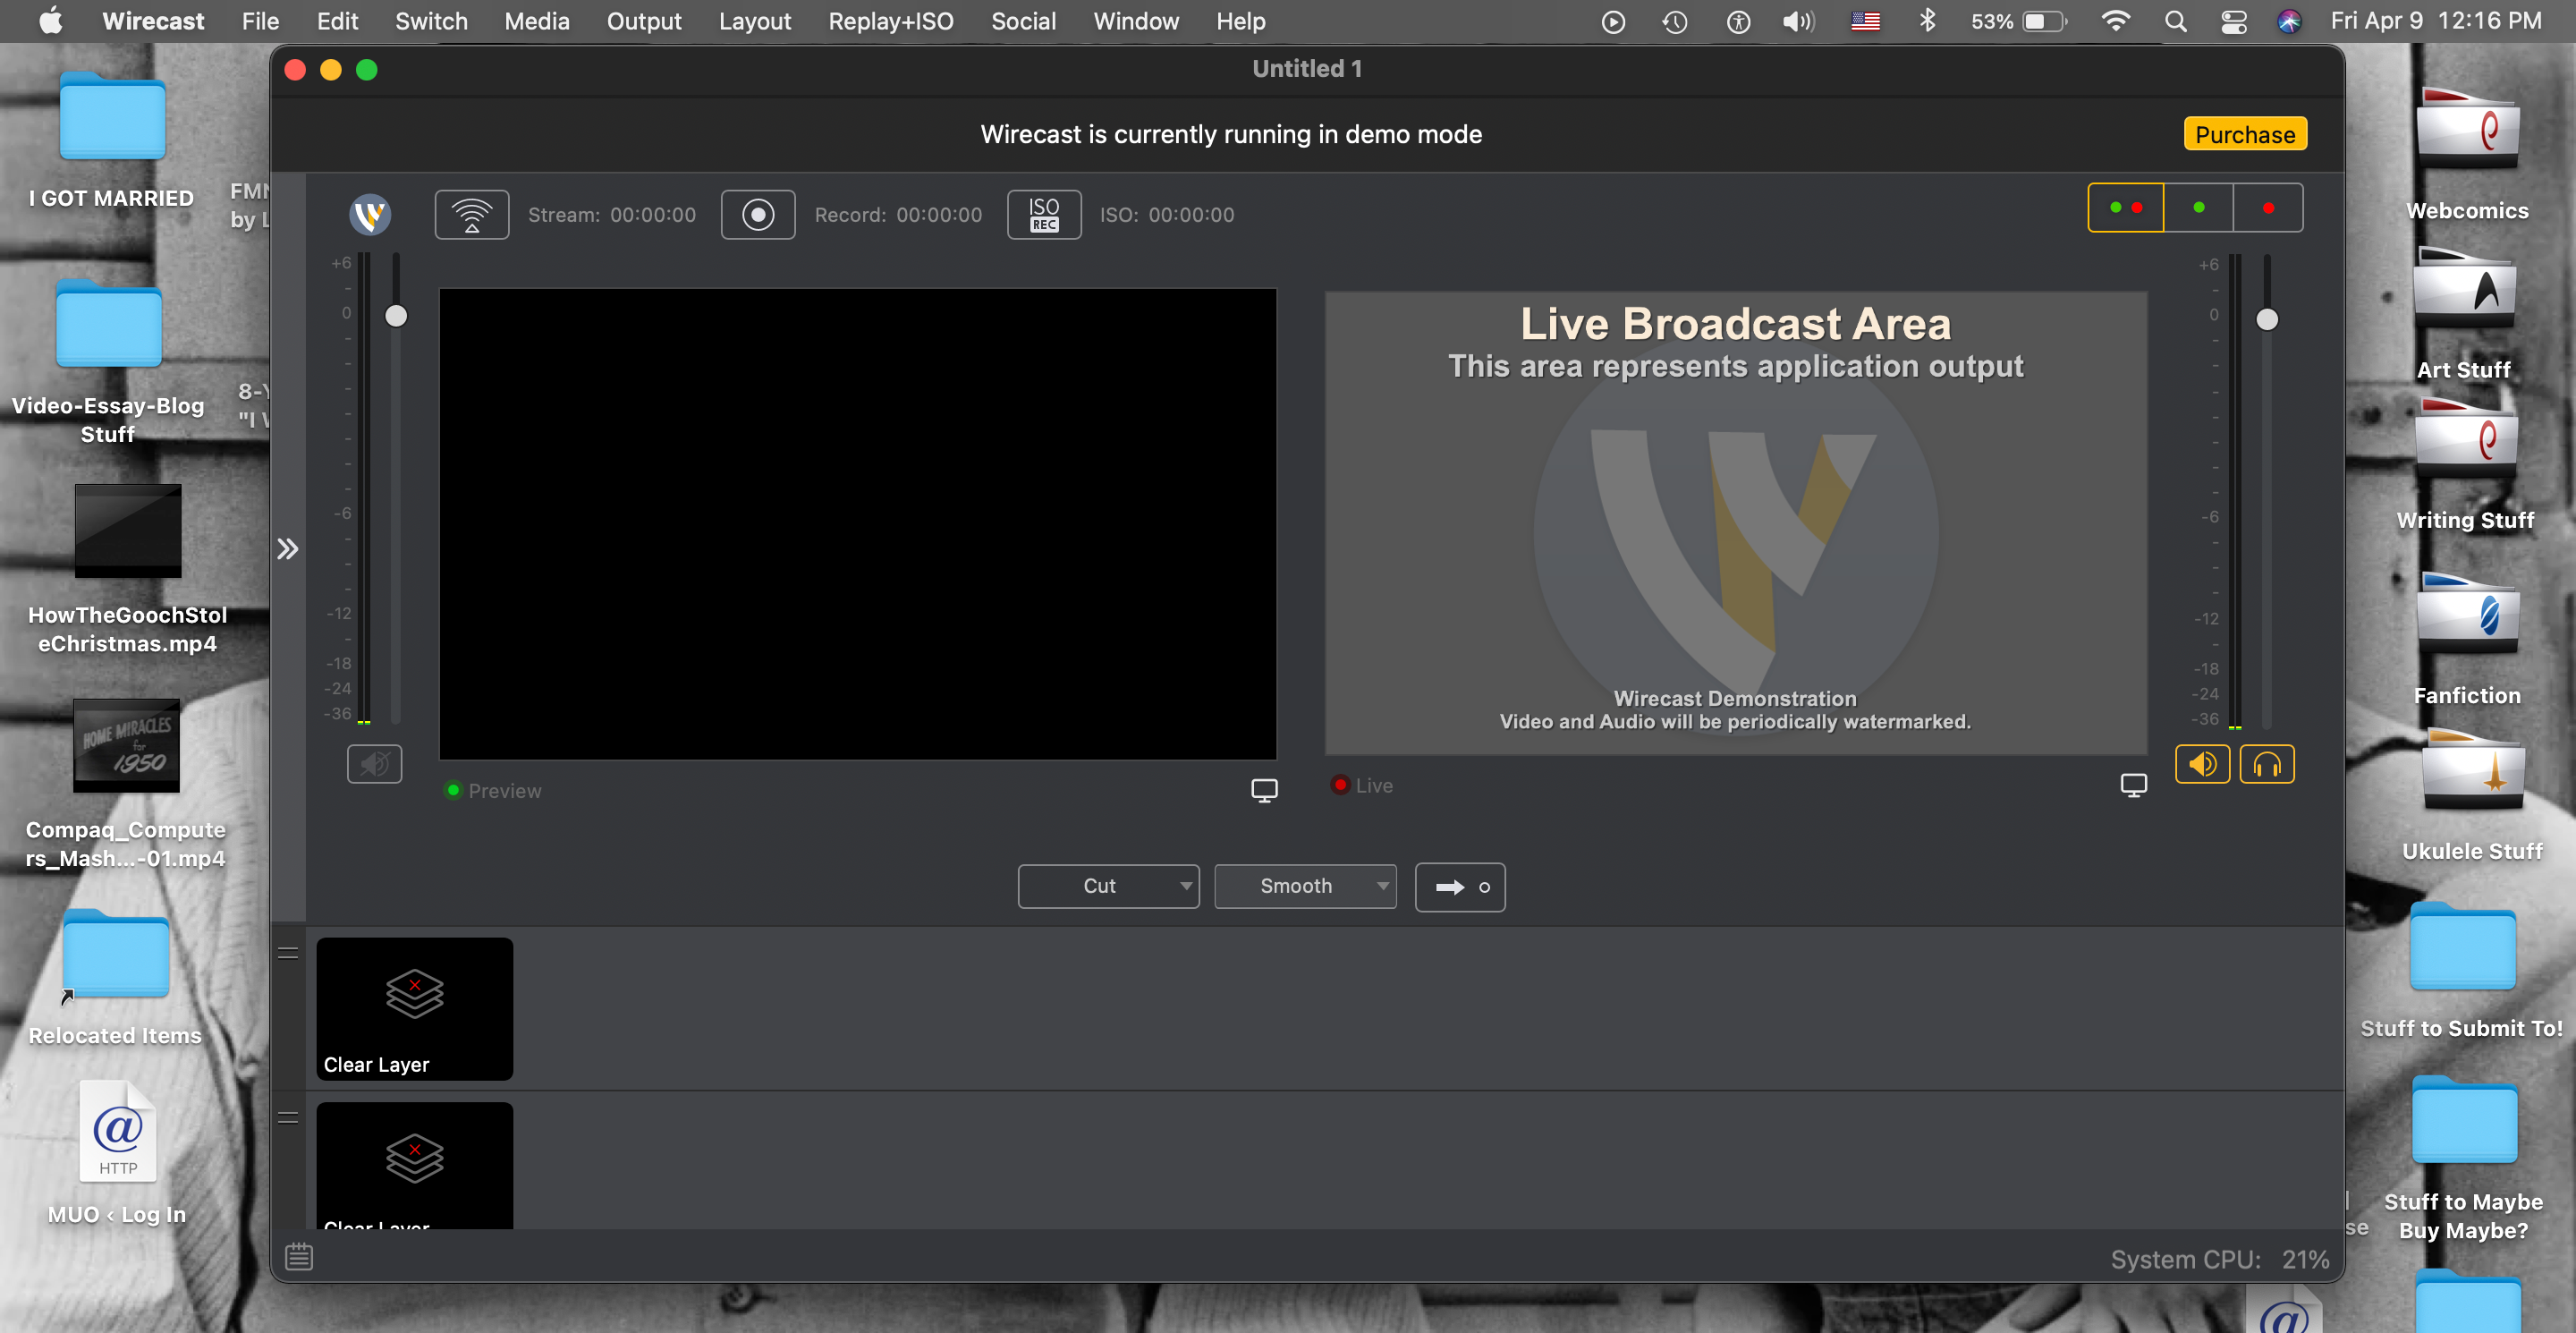 The starting window for Wirecast Studio's demo version on a MacBook Pro